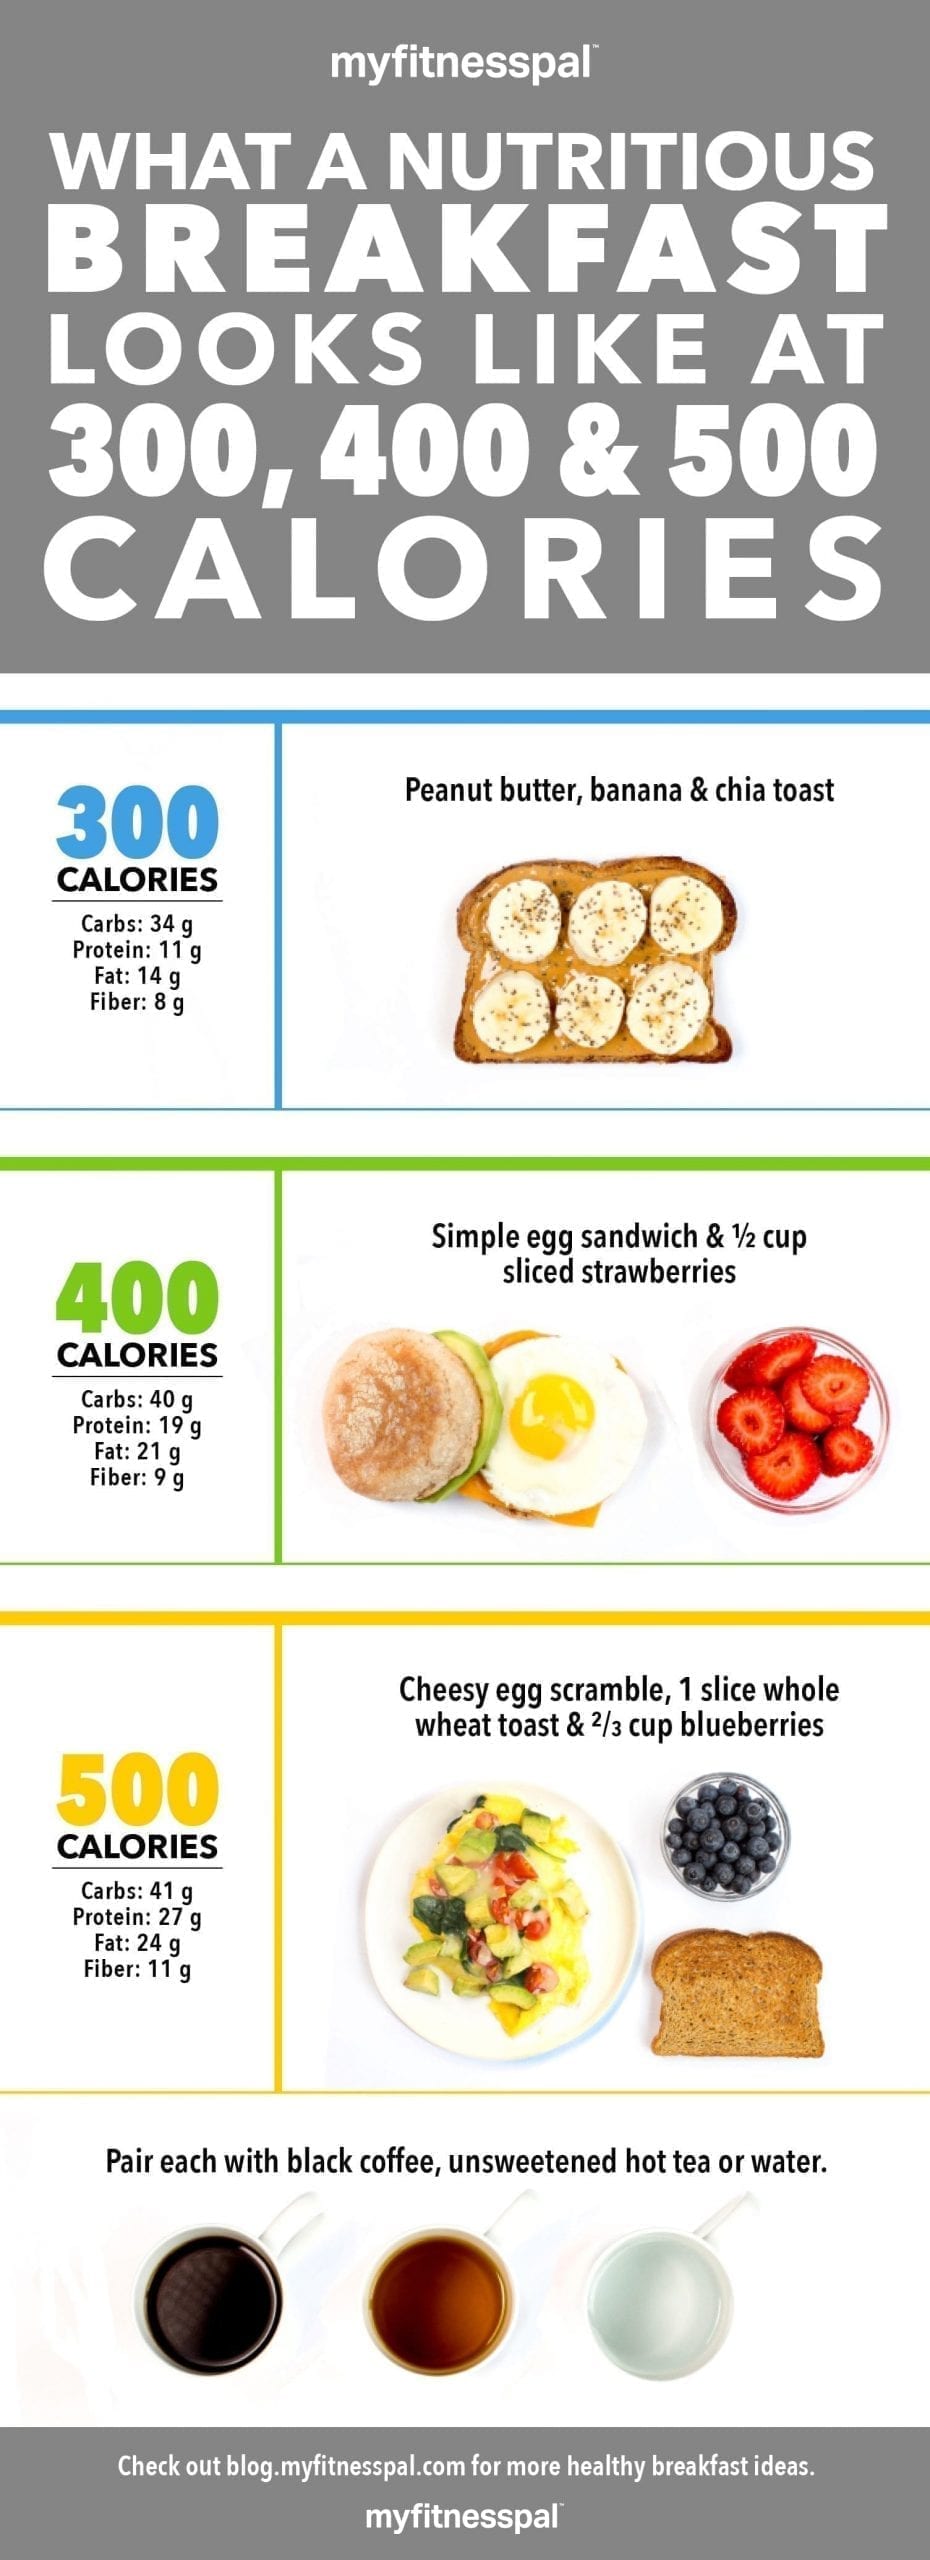 What A Nutritious Breakfast Looks Like At 300, 400 & 500 Calories  [Infographic] | Weight Loss | Myfitnesspal